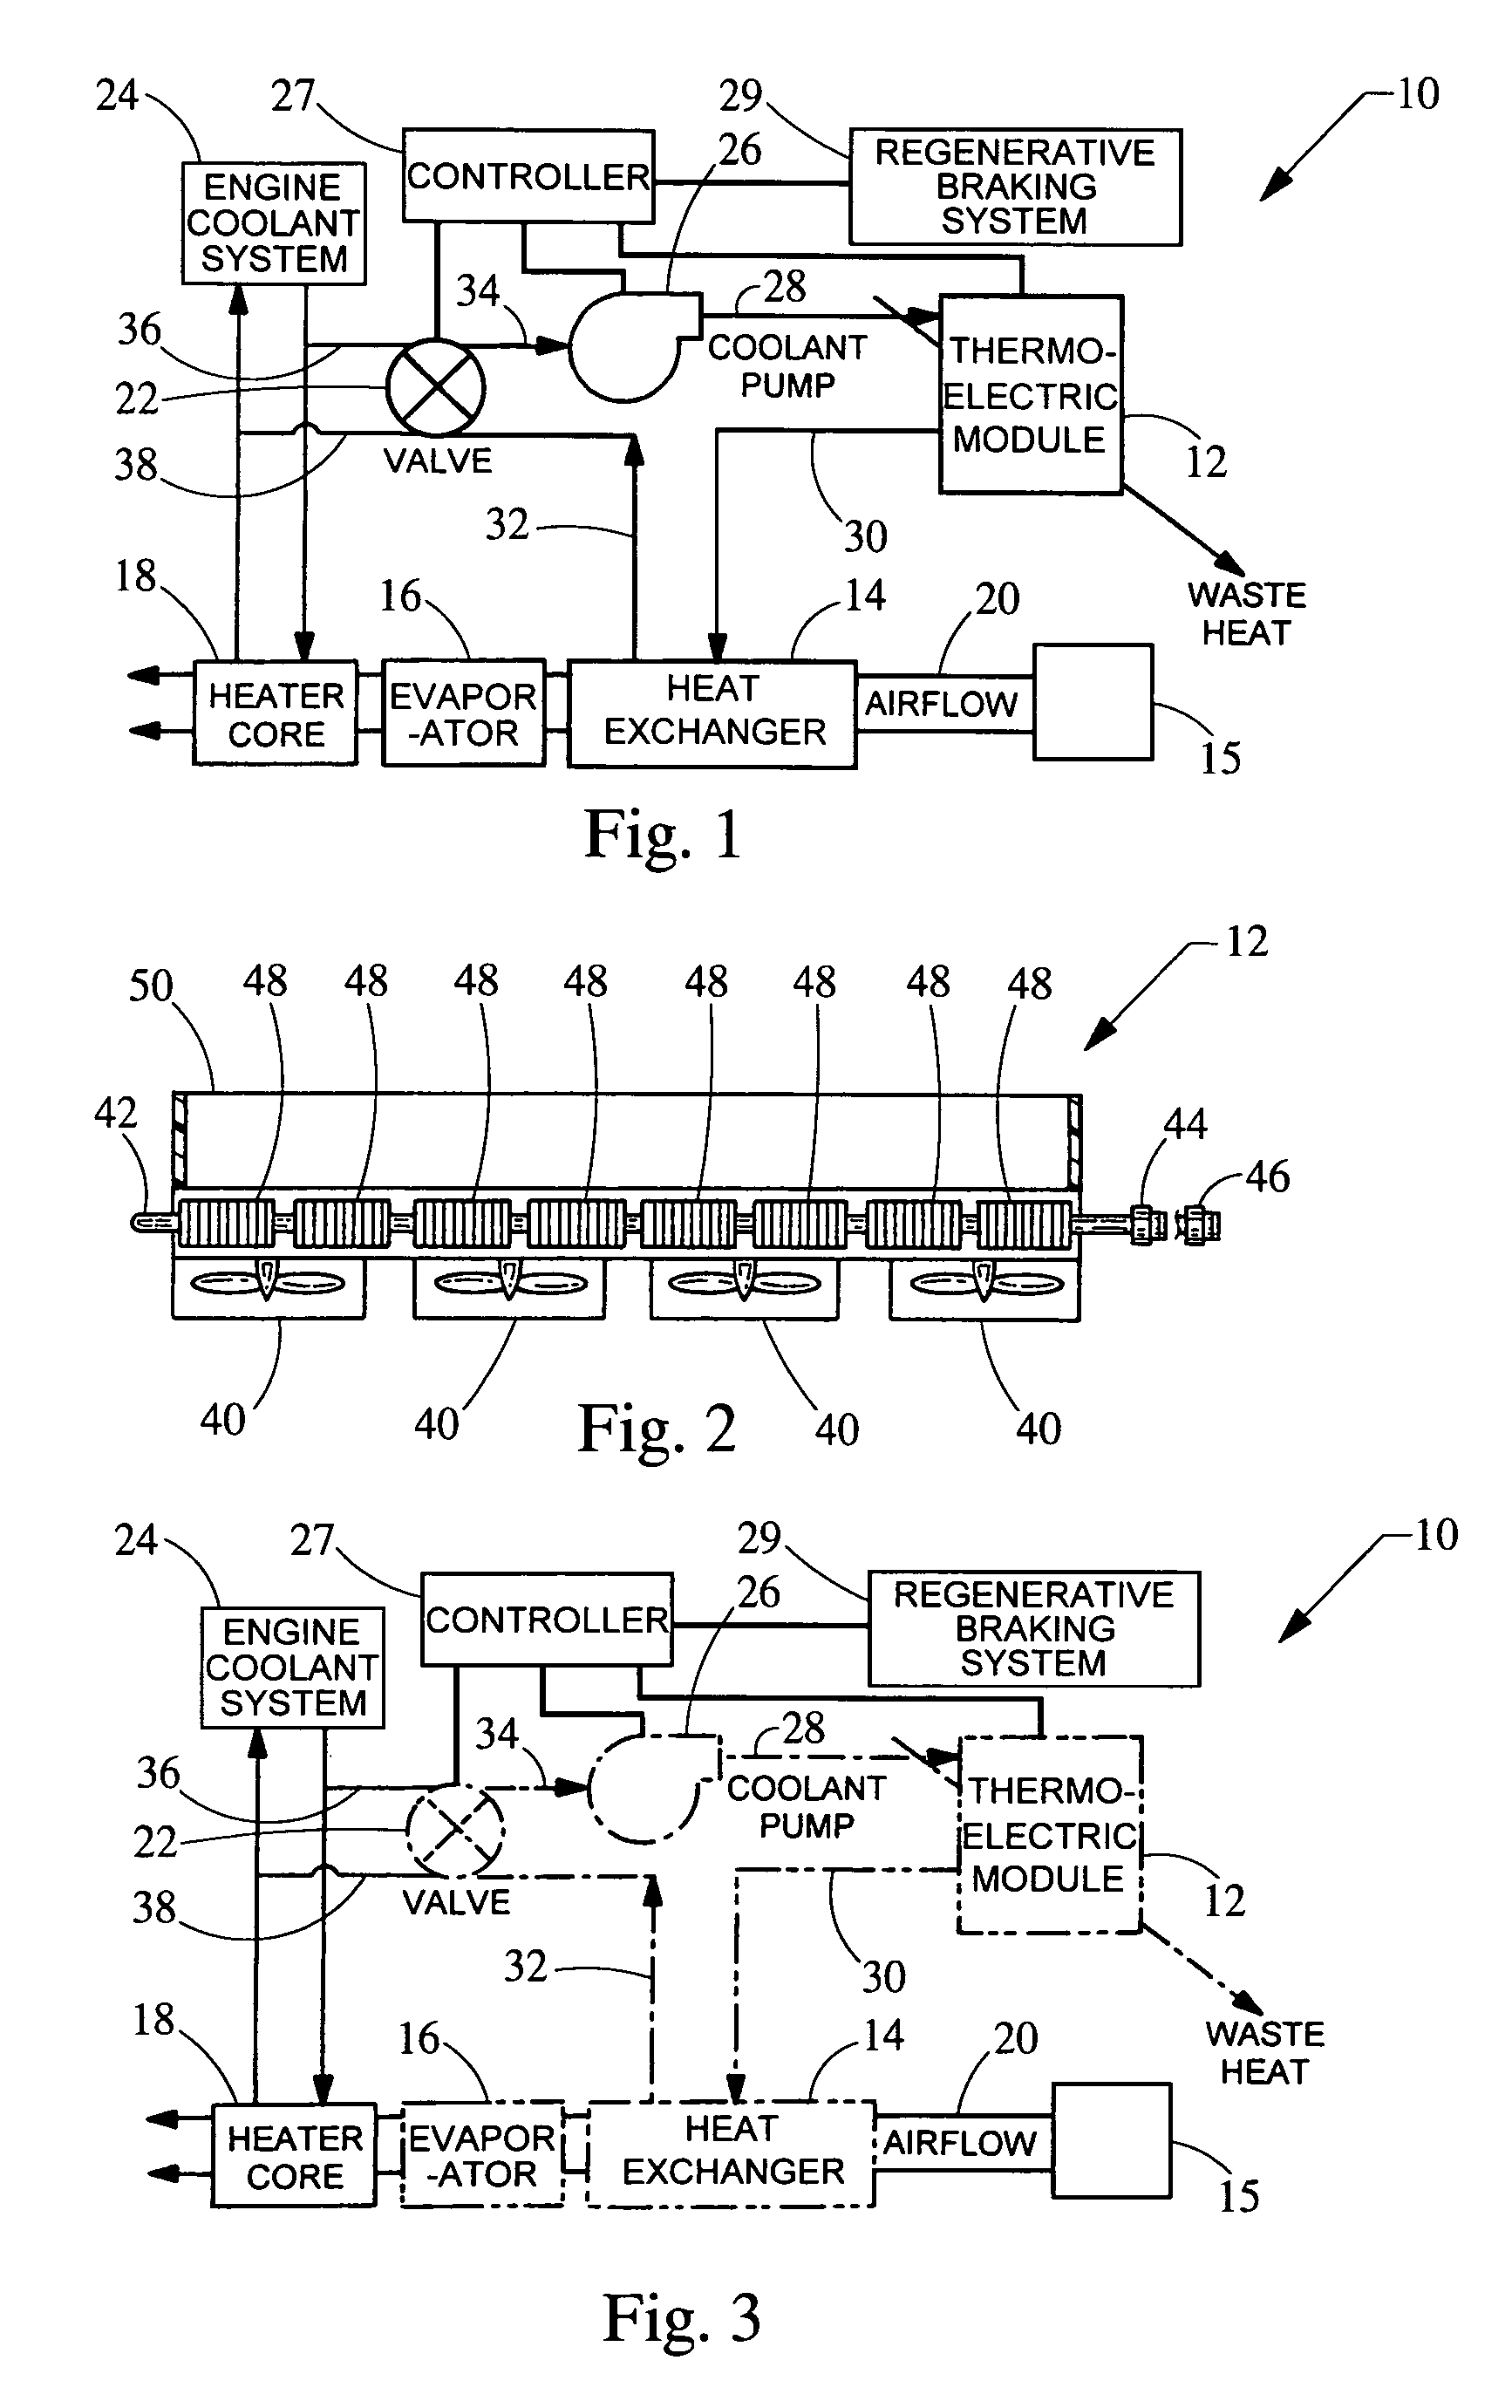 Climate control system for hybrid vehicles using thermoelectric devices